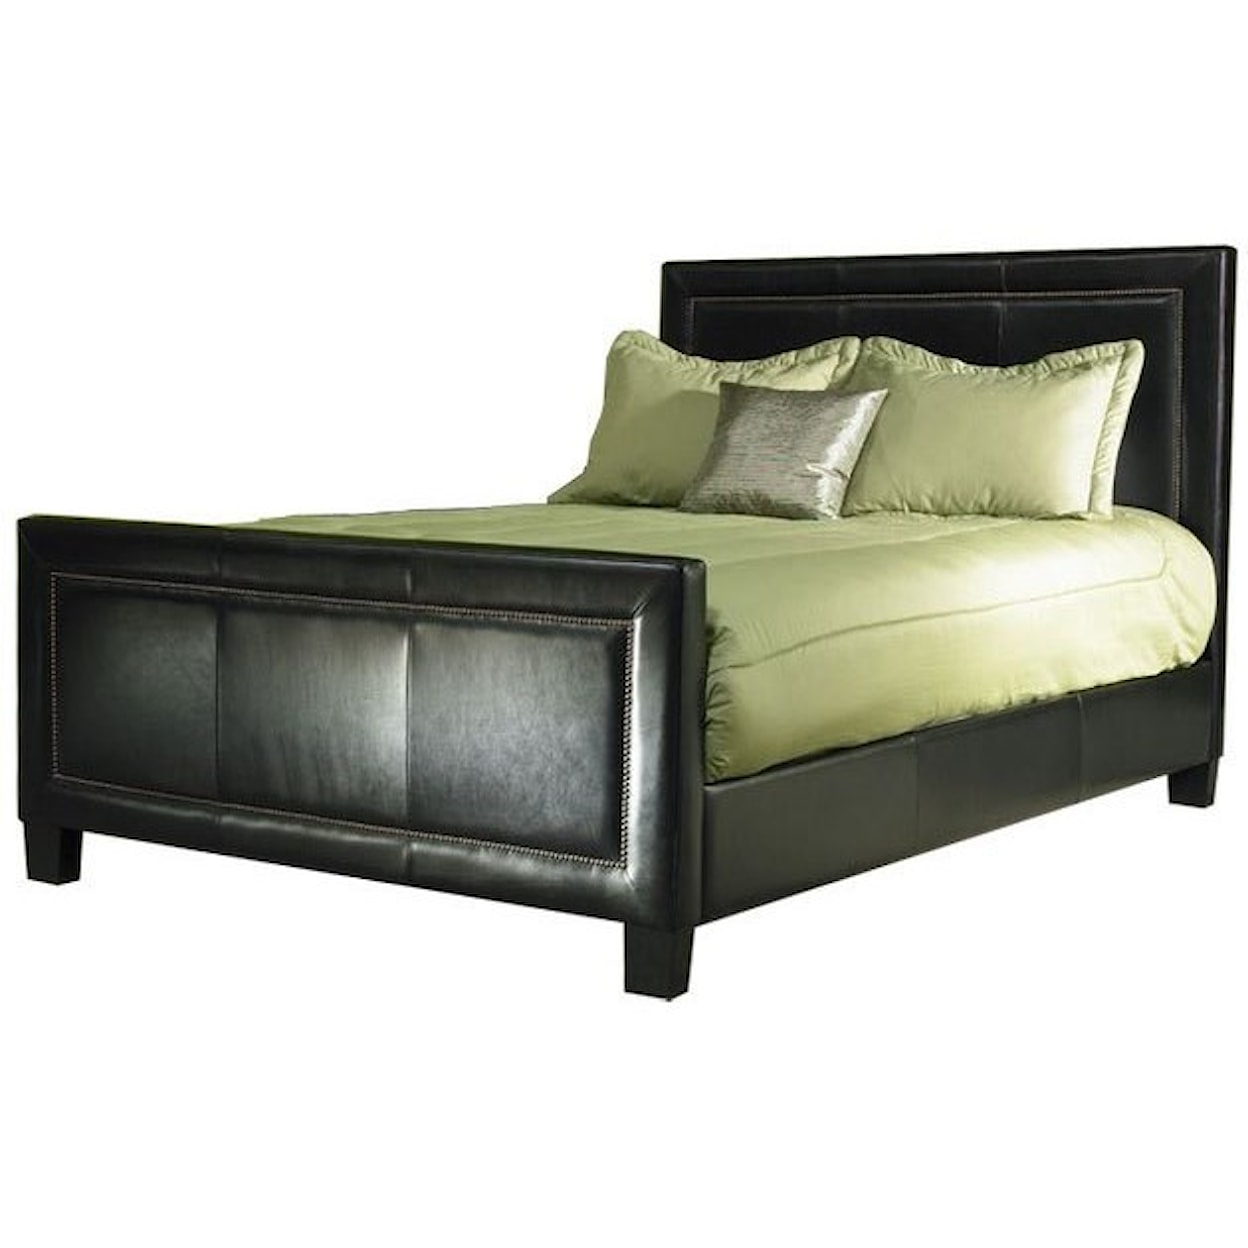 American Leather Copeland Upholstered King Bed